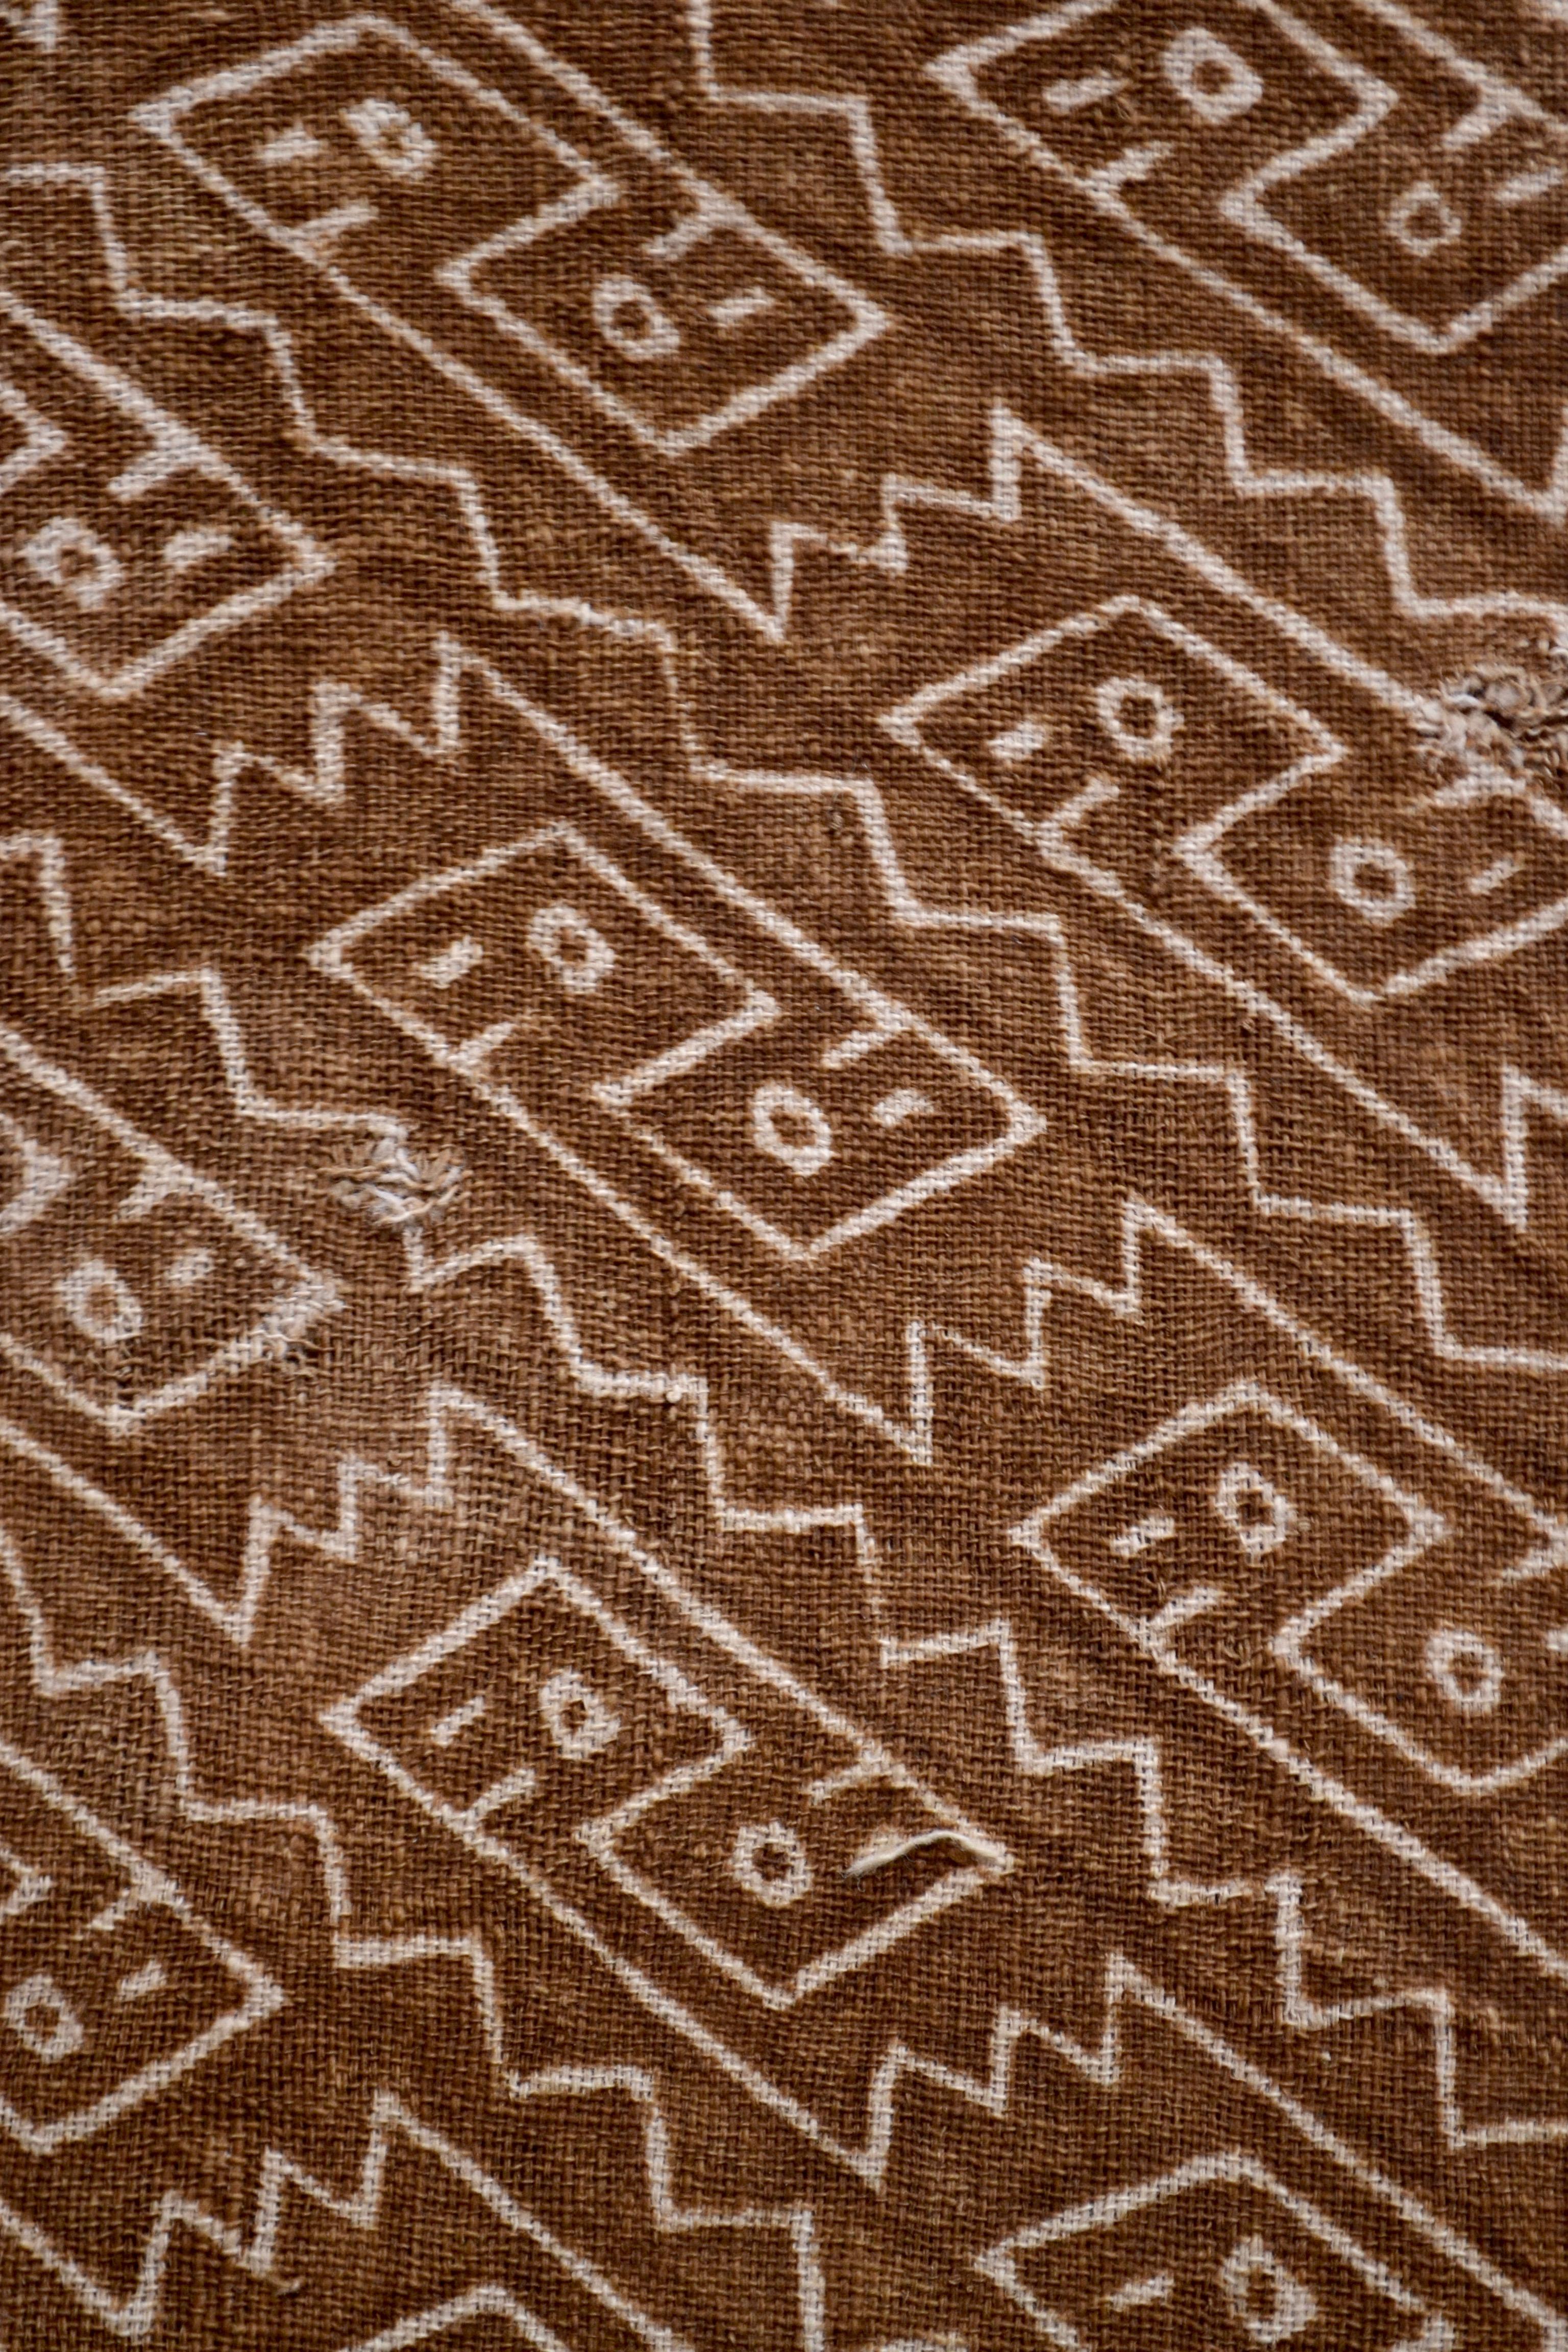 Earth tones textile fragment. Puzzle like figures painted above a light pink stripe.

It is a wonder to behold antiquities such as a pre-Columbian textiles, an authentic piece of art that has been preserved for centuries and that survives